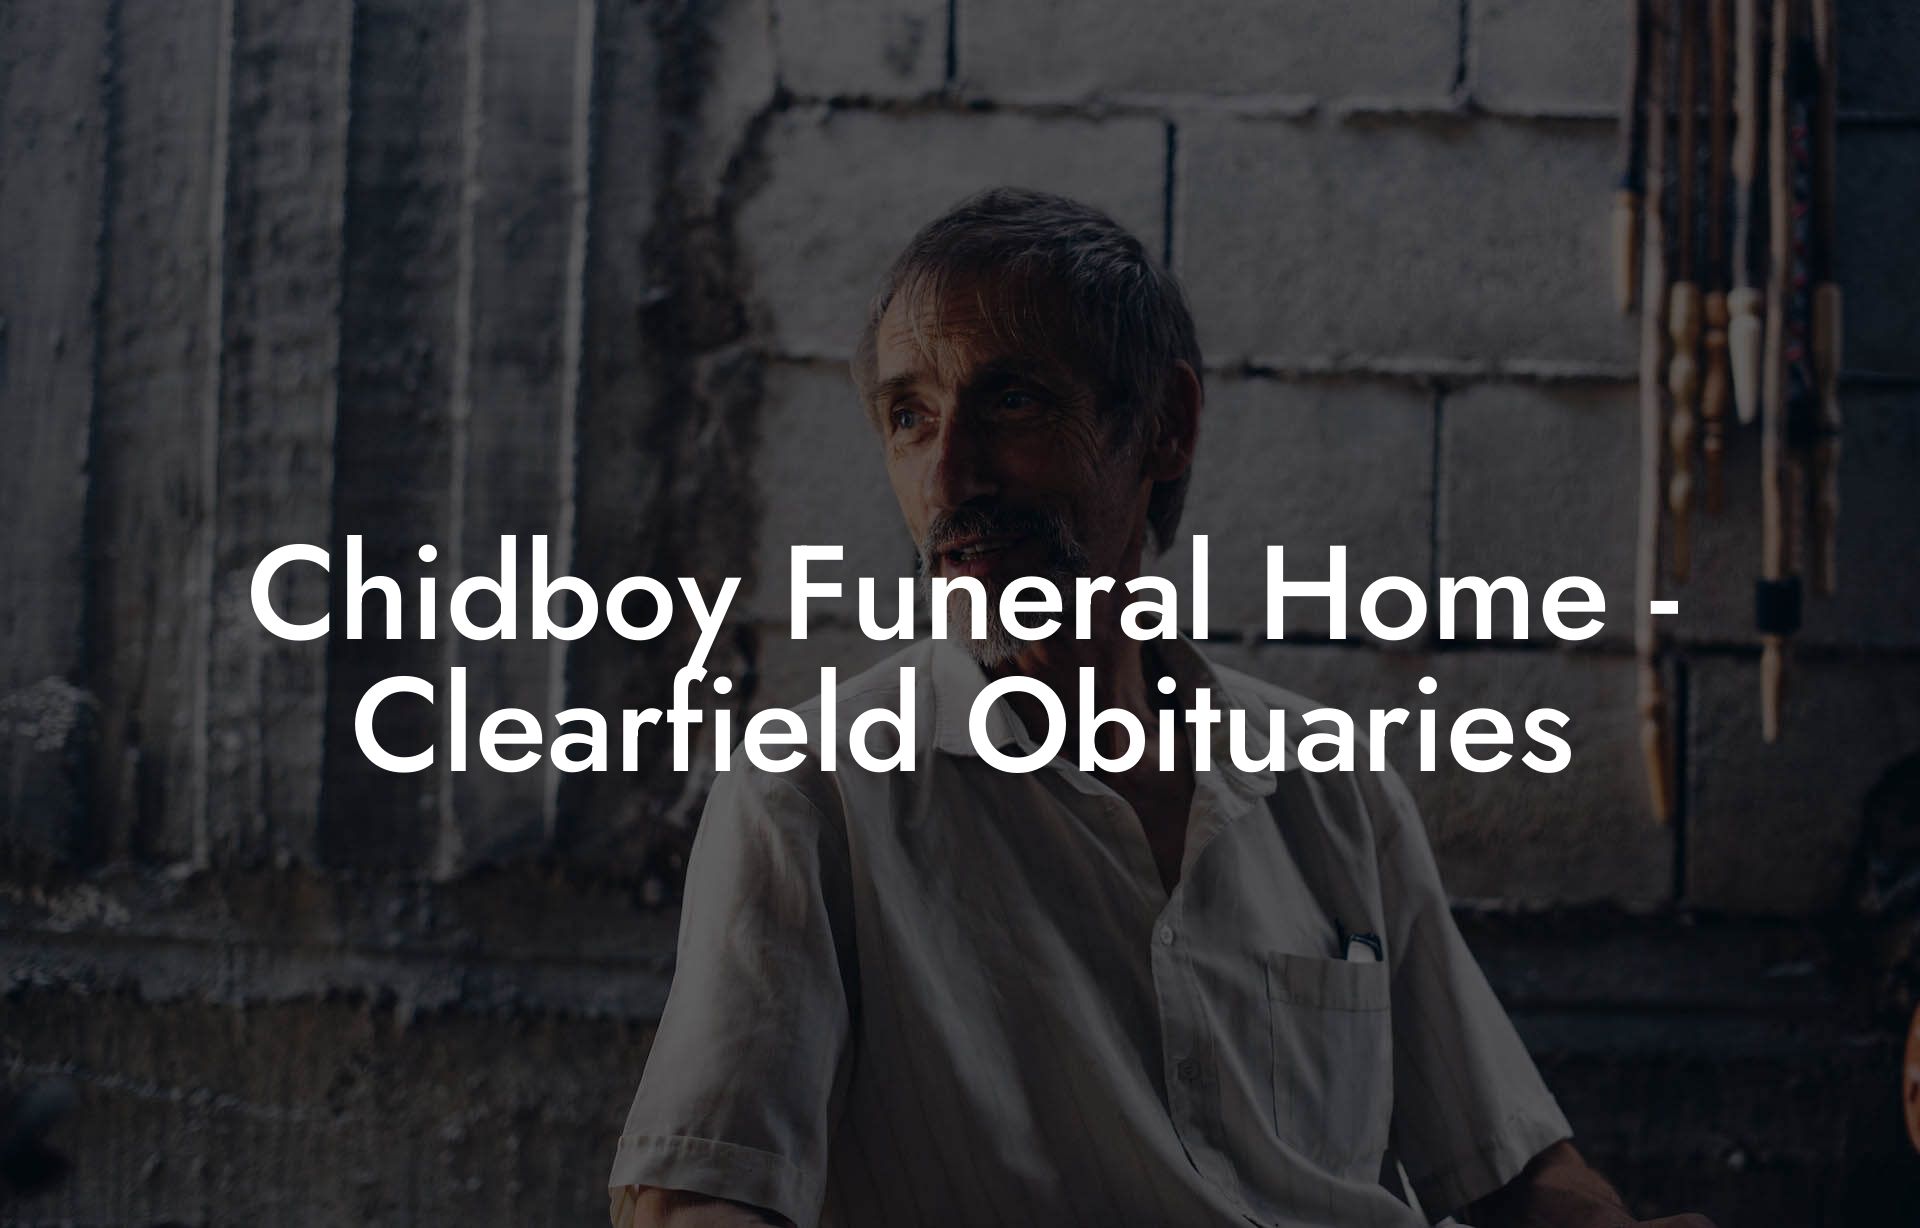 Chidboy Funeral Home - Clearfield Obituaries